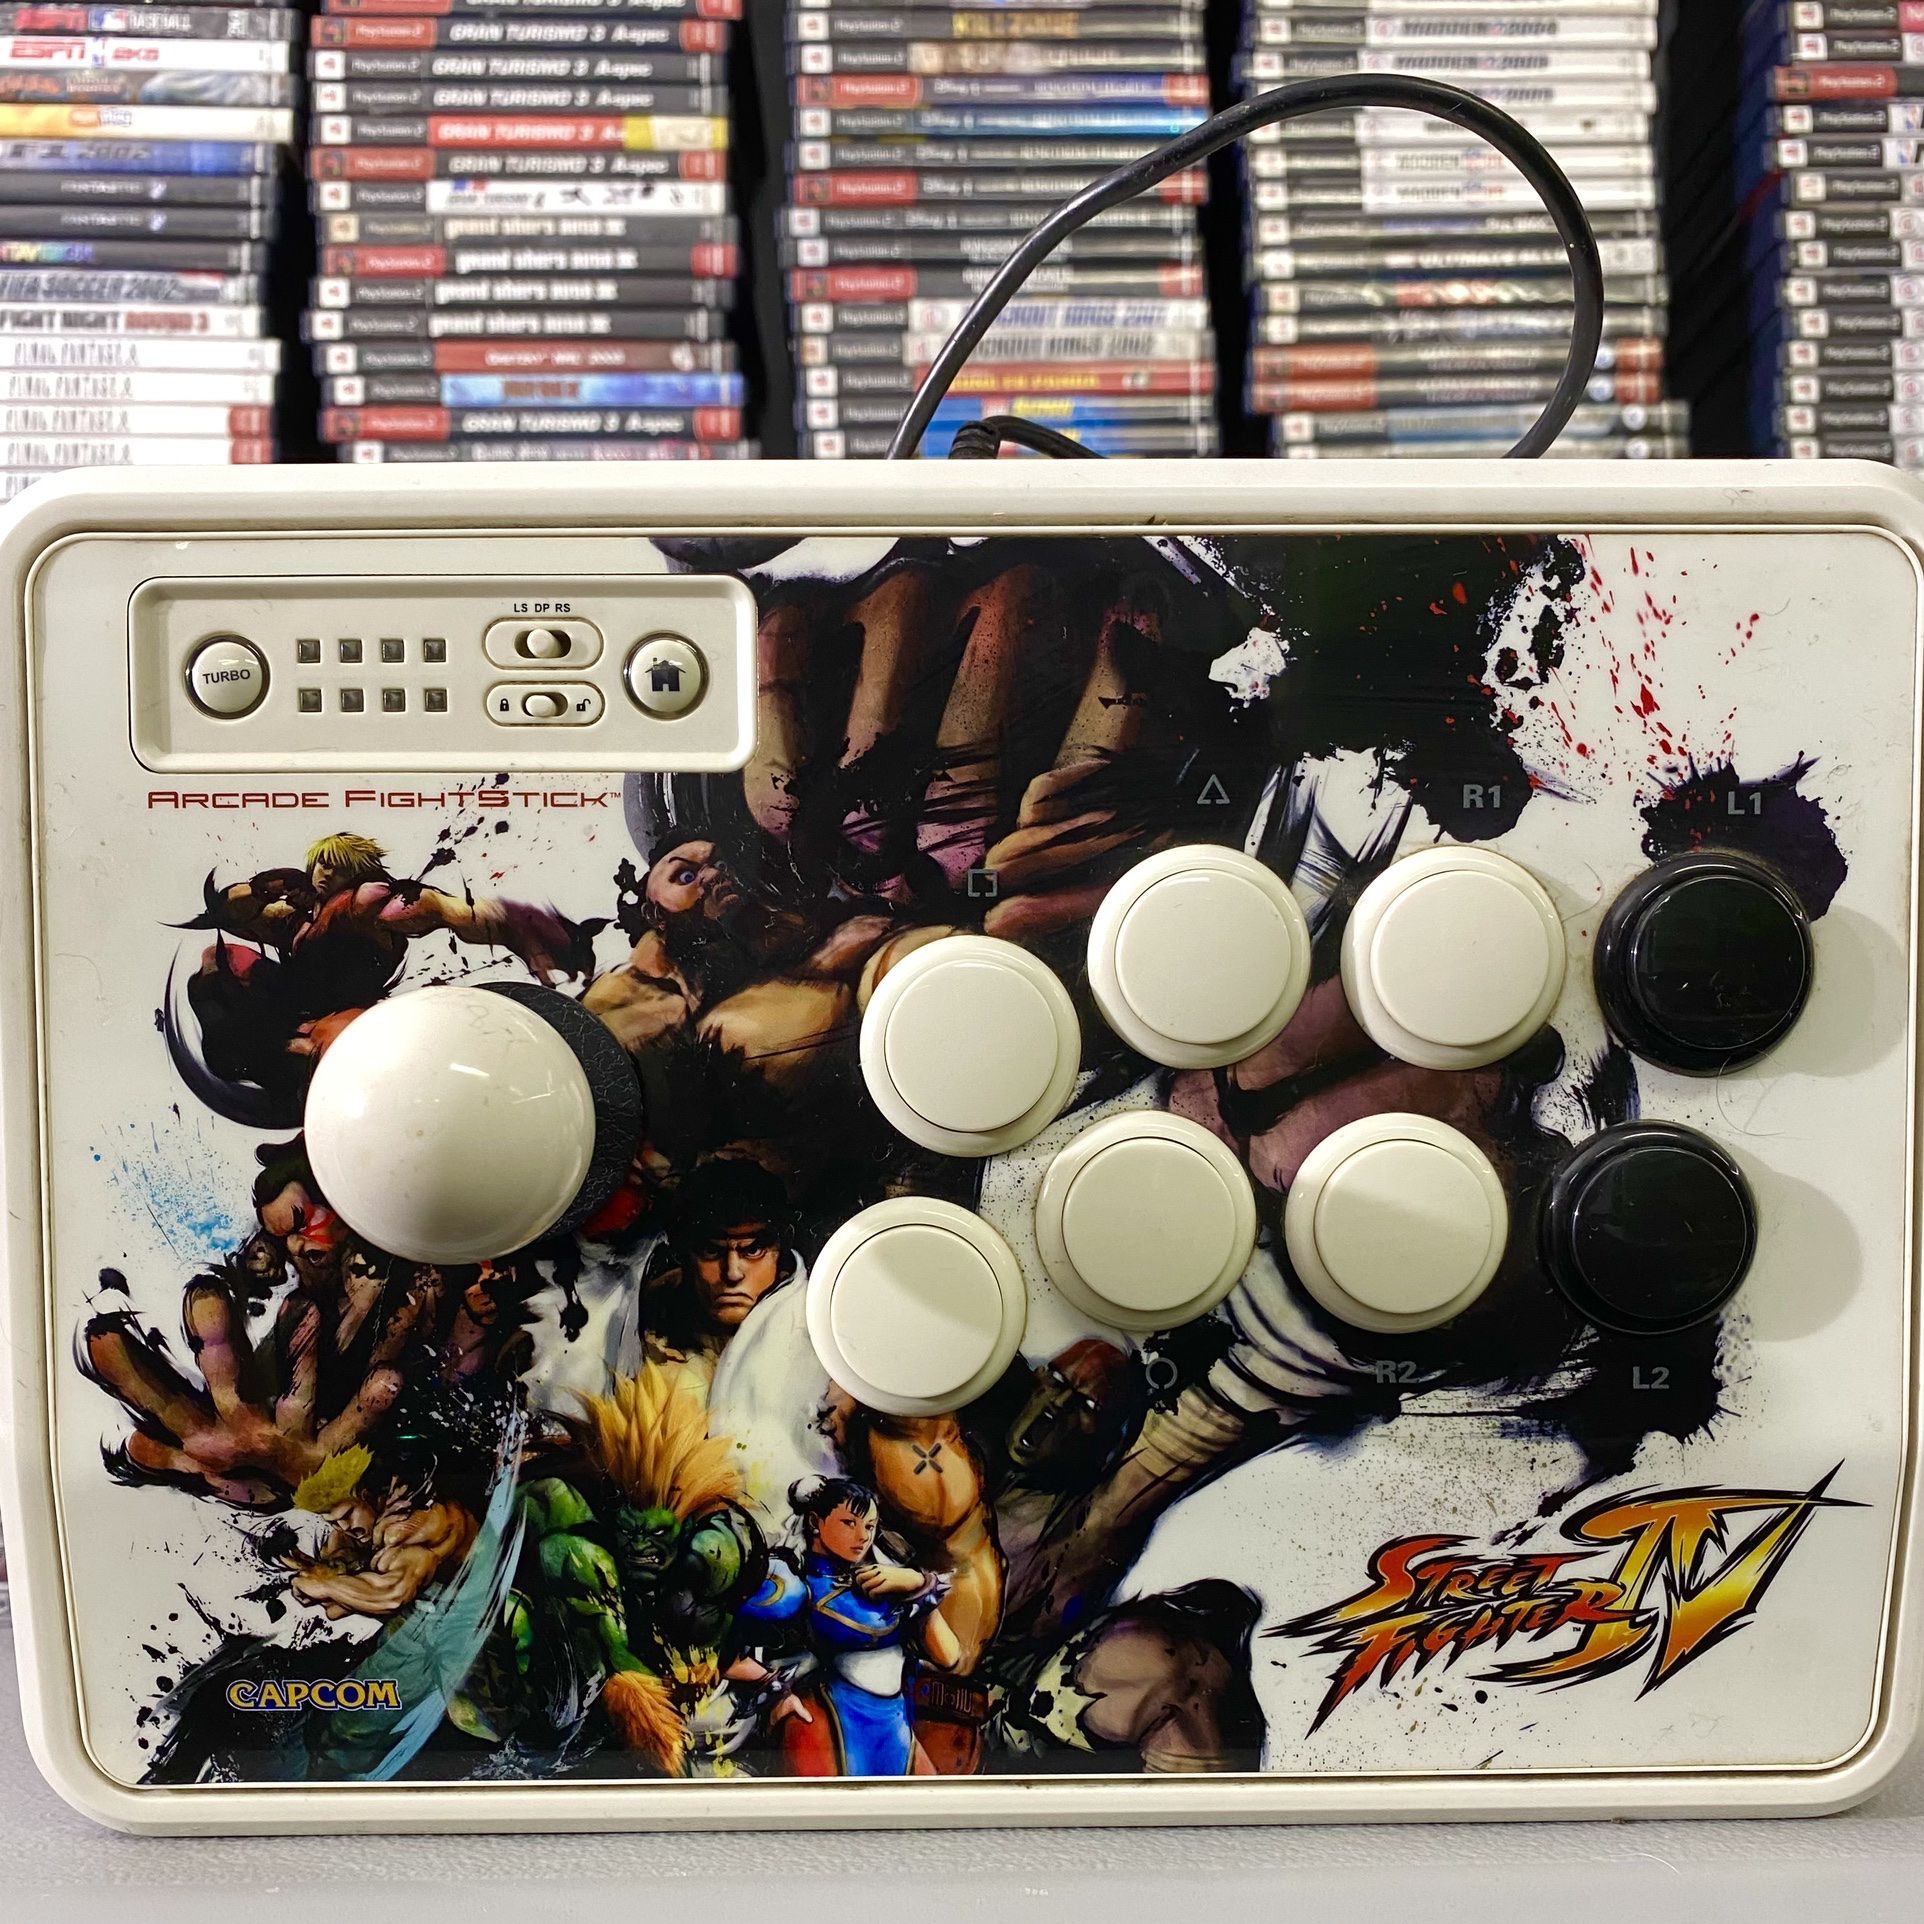 Mad Catz Street Fighter IV 4 PS3 Arcade Fightstick  *TRADE IN YOUR OLD GAMES/TCG/COMICS/PHONES/VHS FOR CSH OR CREDIT HERE*